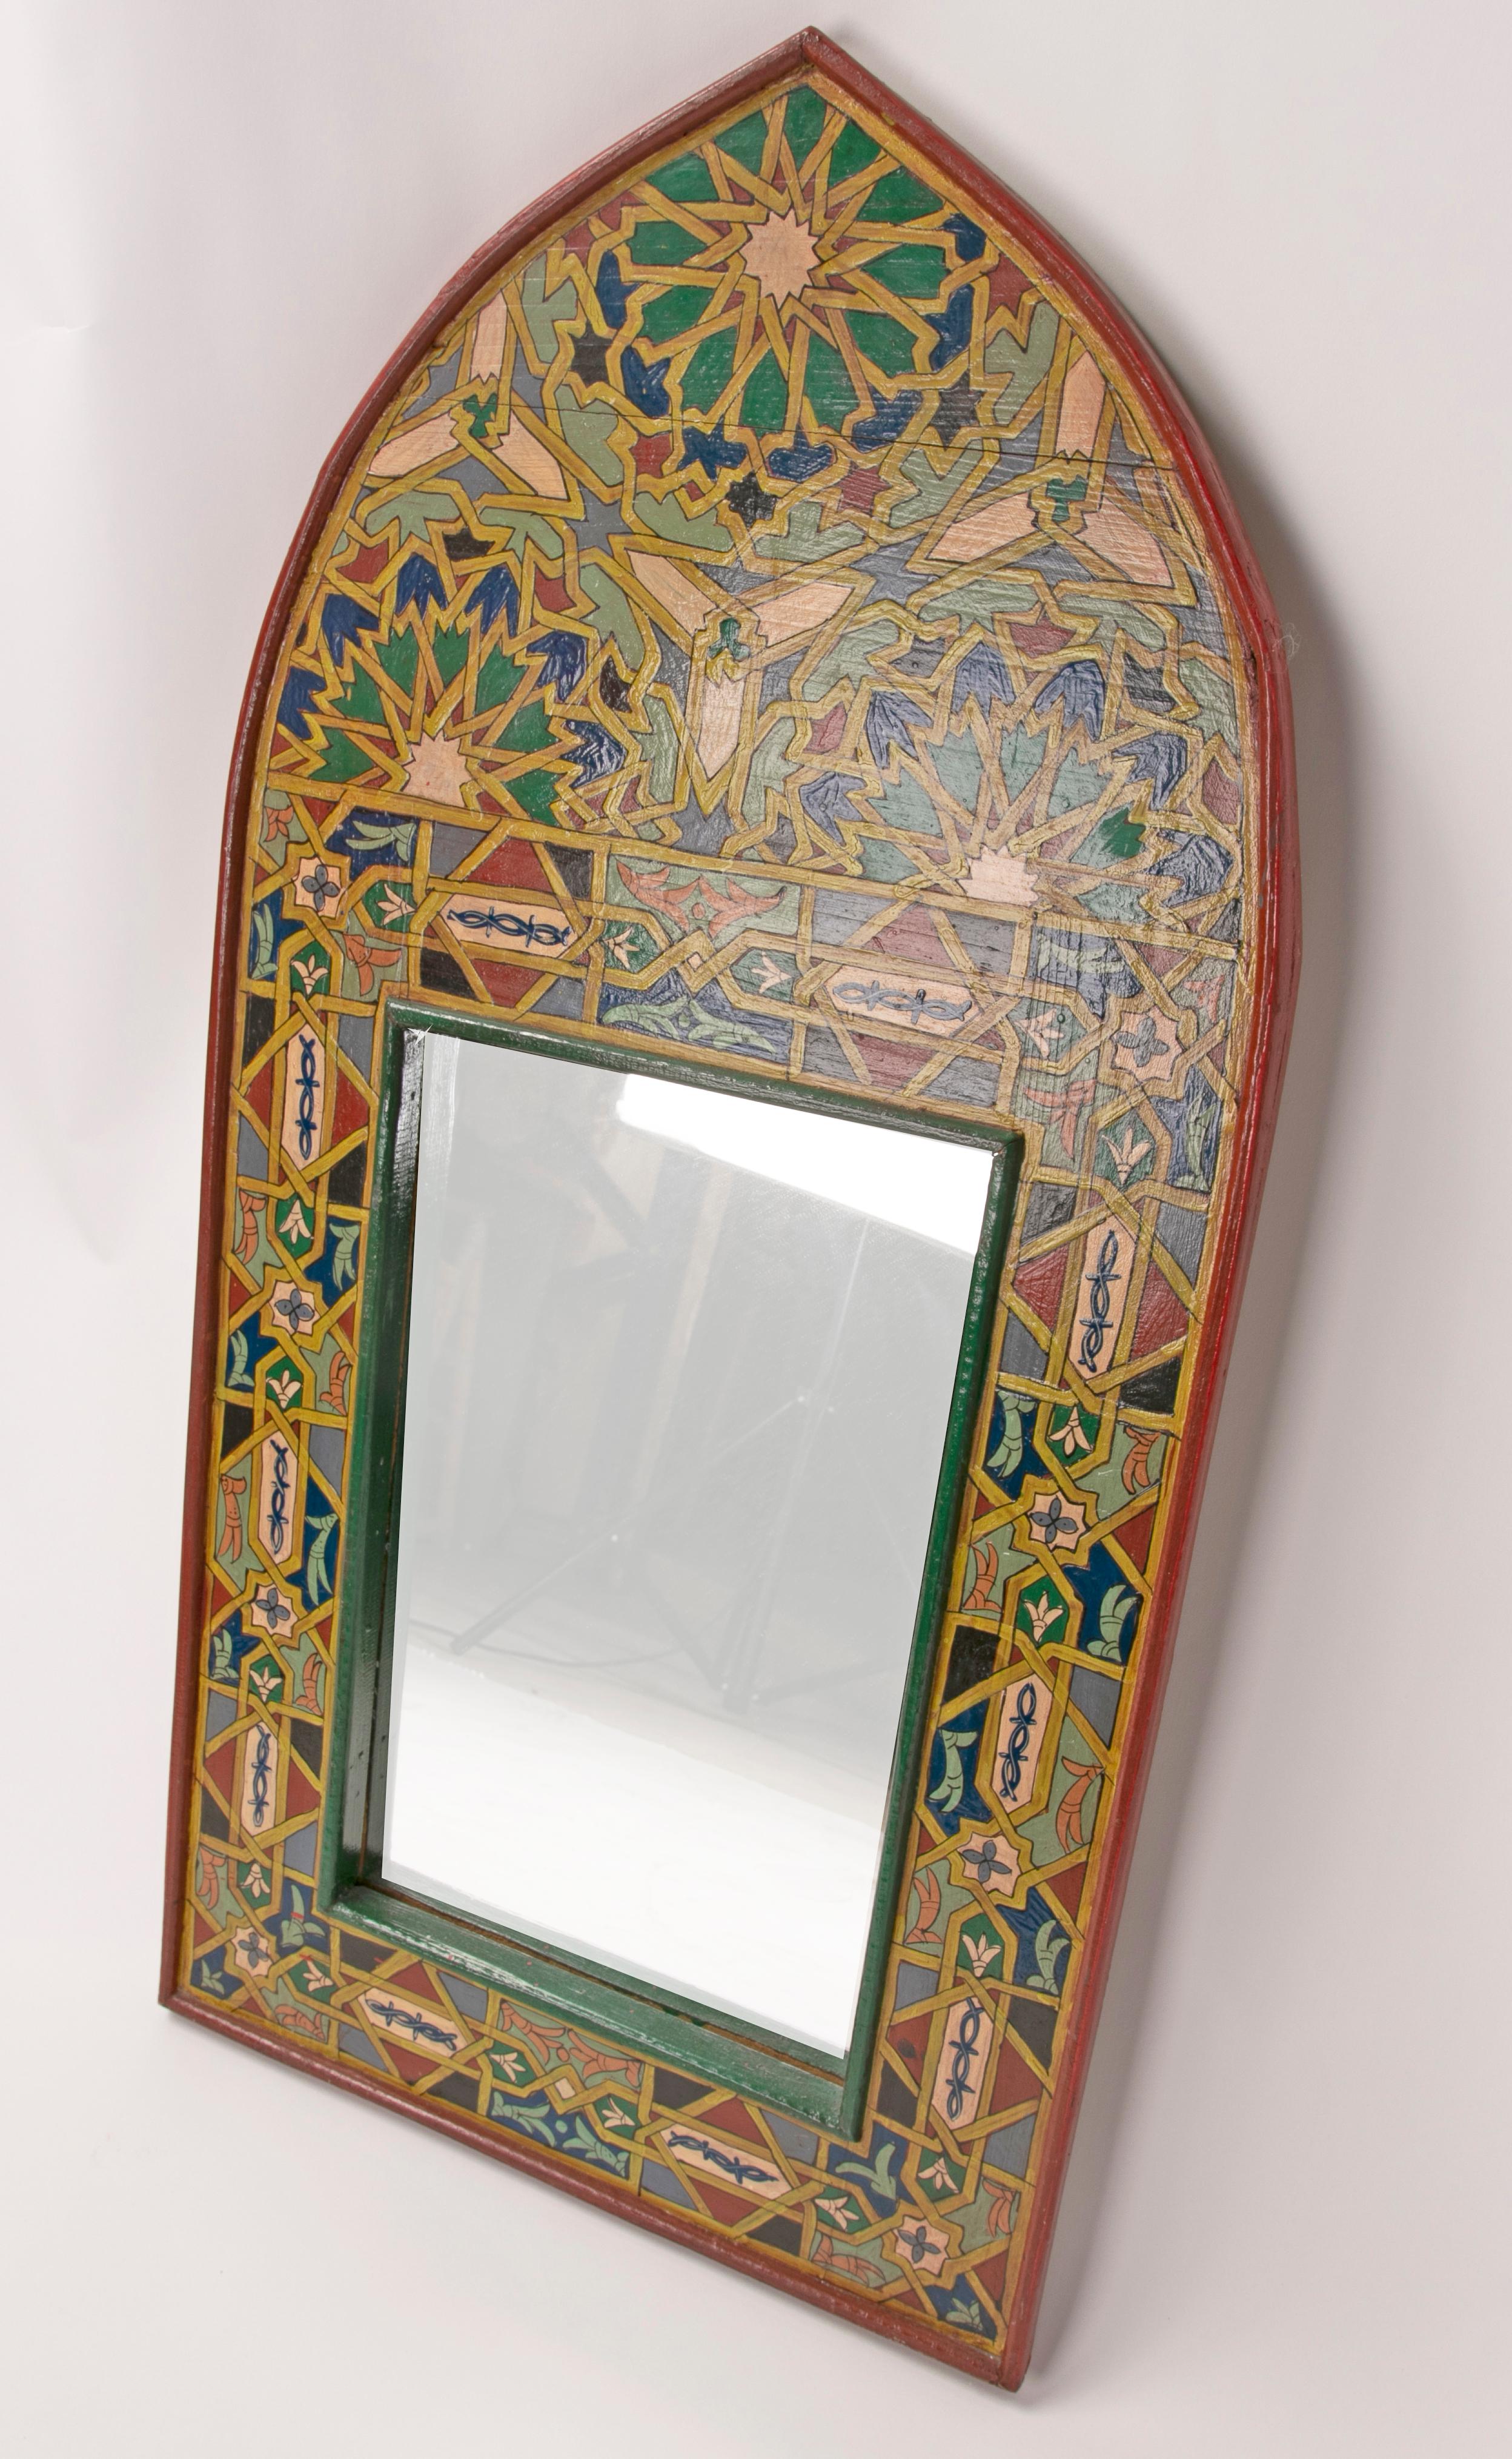 1980s Hand-Painted Wooden Moroccan Mirror.